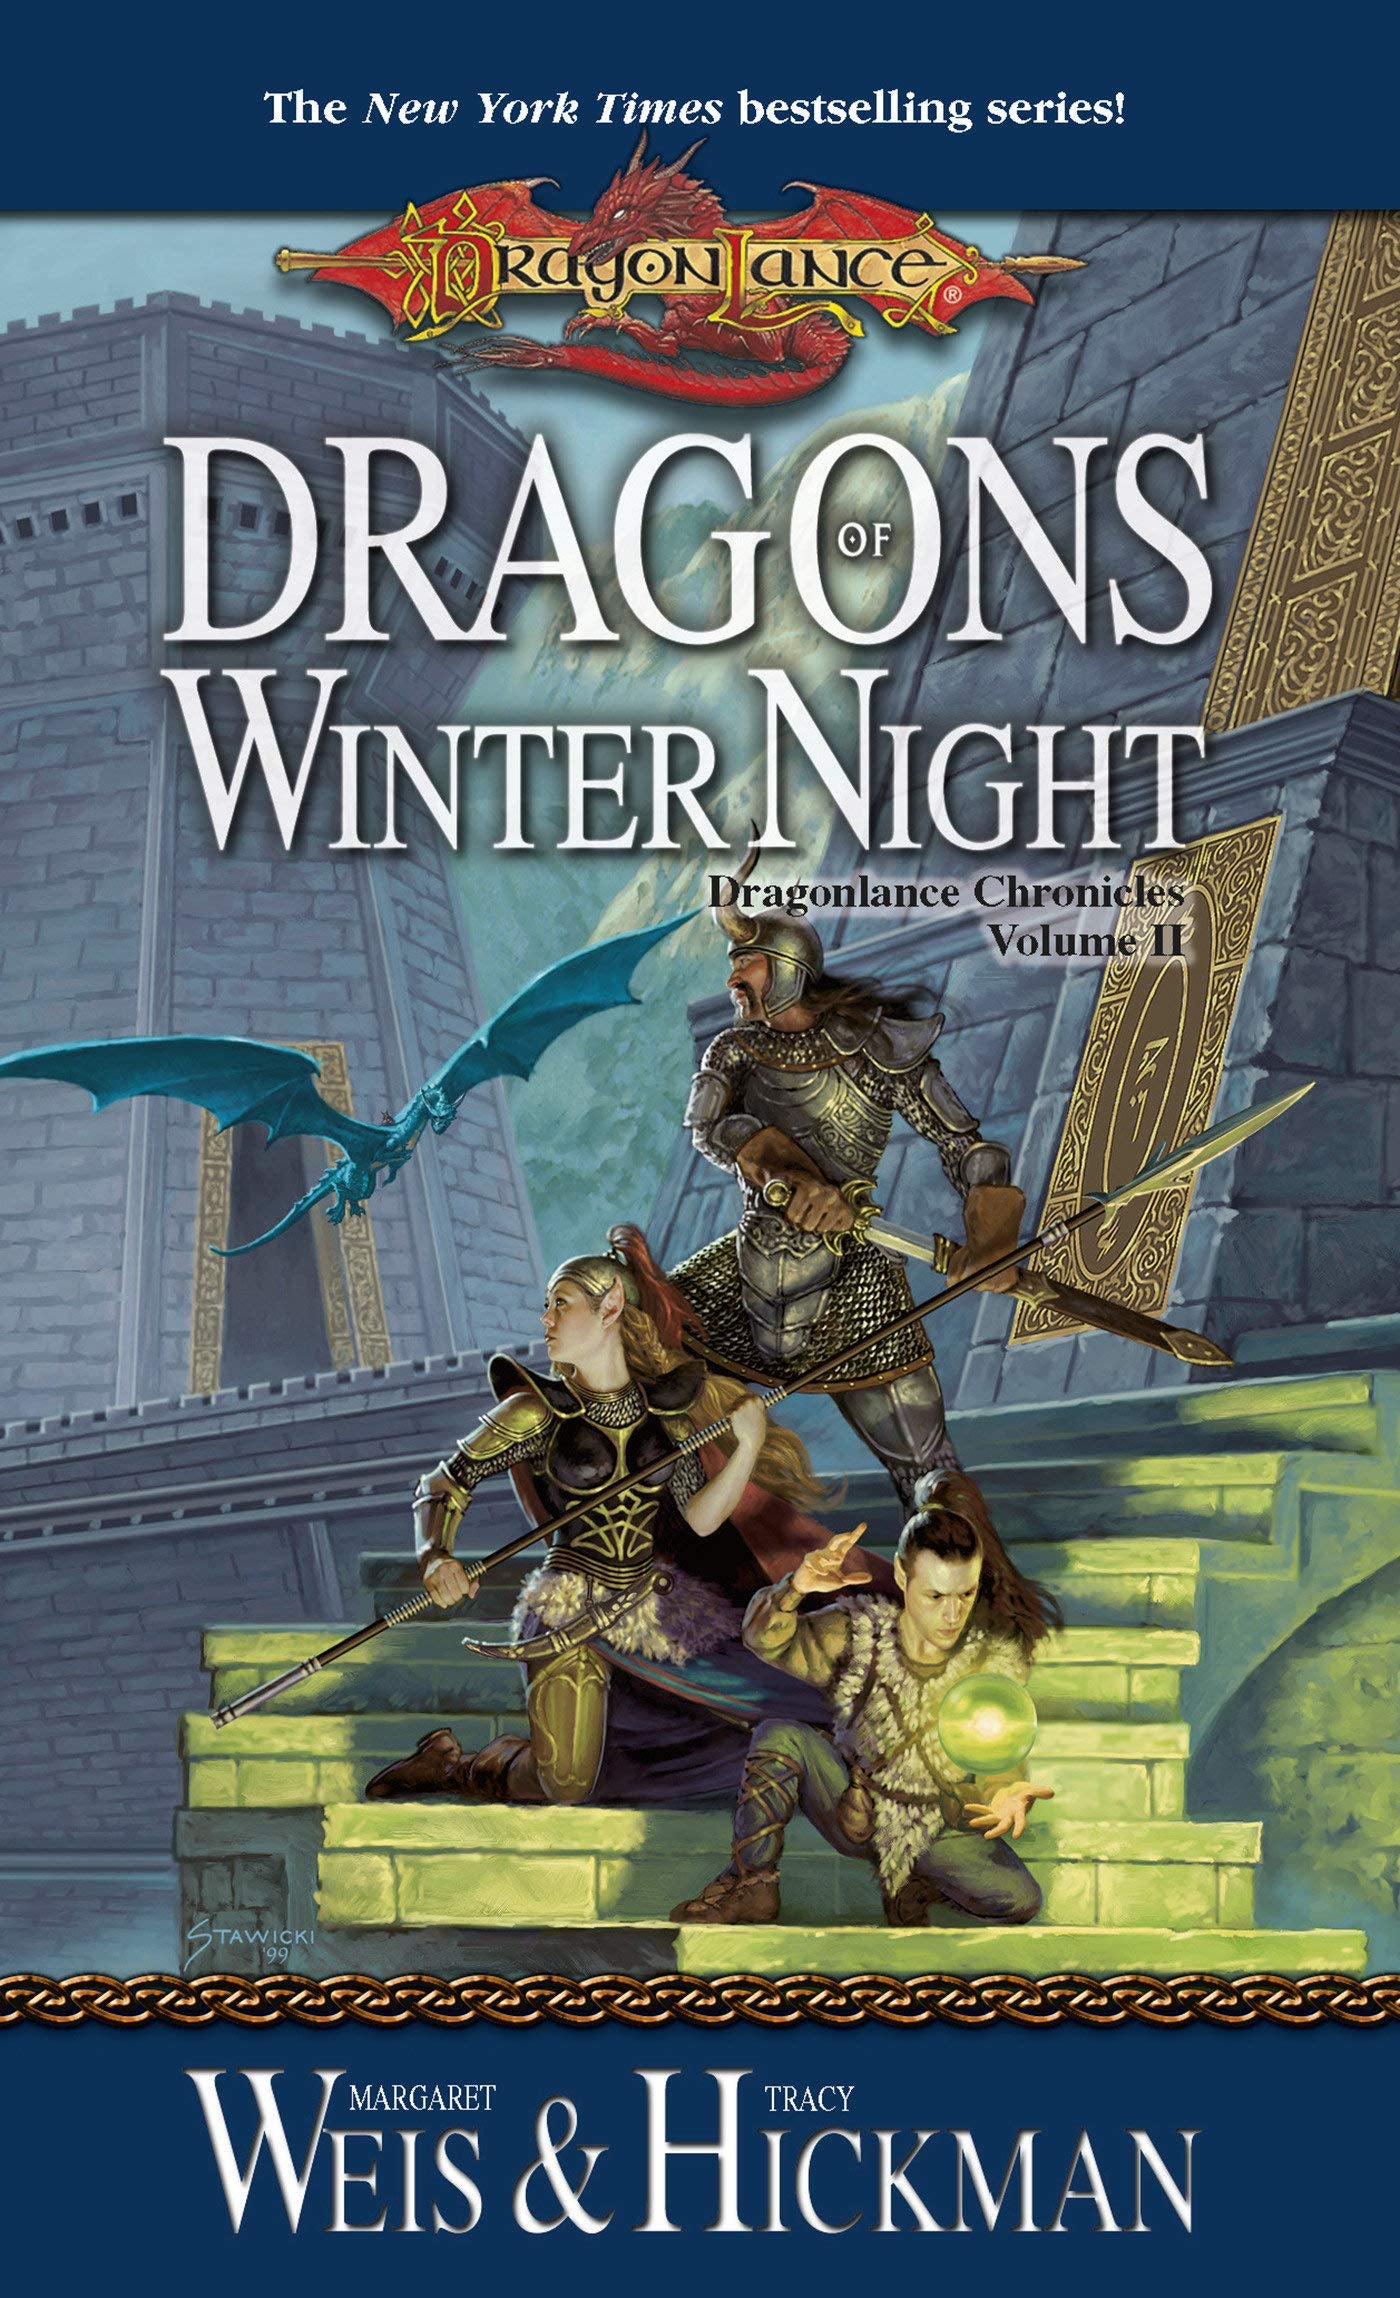 Matt Stawicki's cover for the 2000 reprint of Dragons of Winter Night, featuring Sturm, Laurana, and Tasslehoff. (Image: Wizards of the Coast)